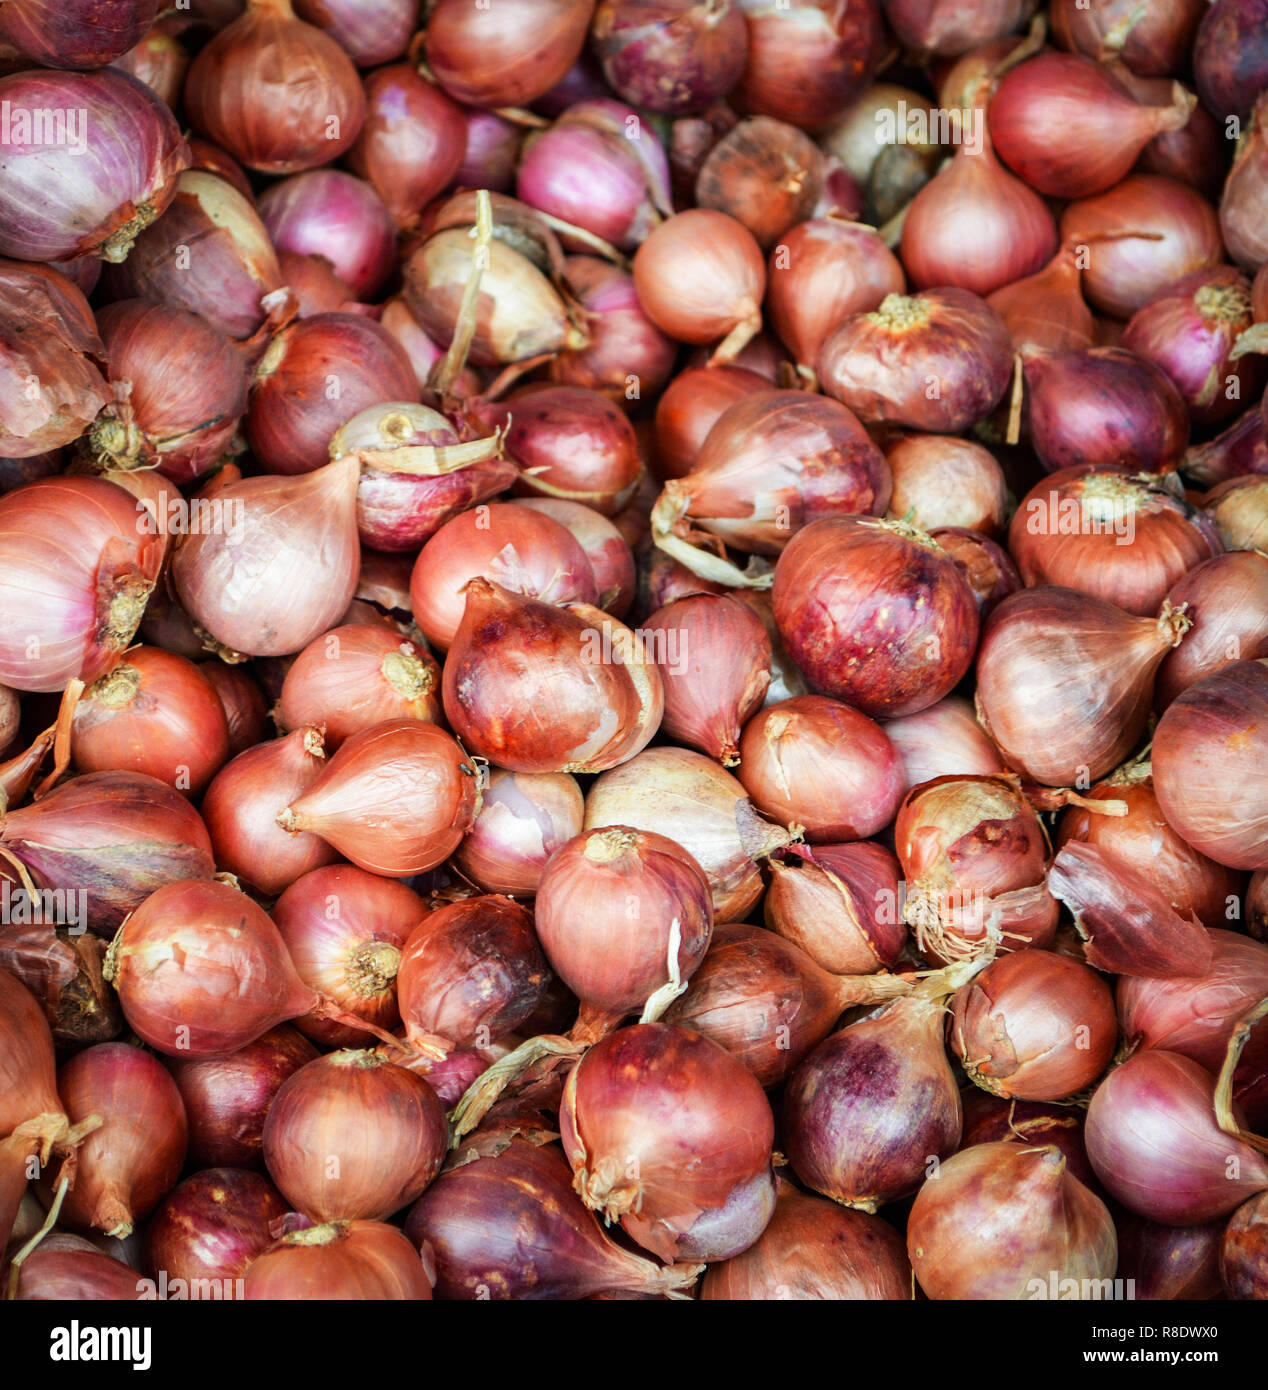 Shallots or red onion, purple shallots on wooden background , fresh shallot  for medicinal products or herbs and spices Thai food made from this raw  shallot 10238227 Stock Photo at Vecteezy